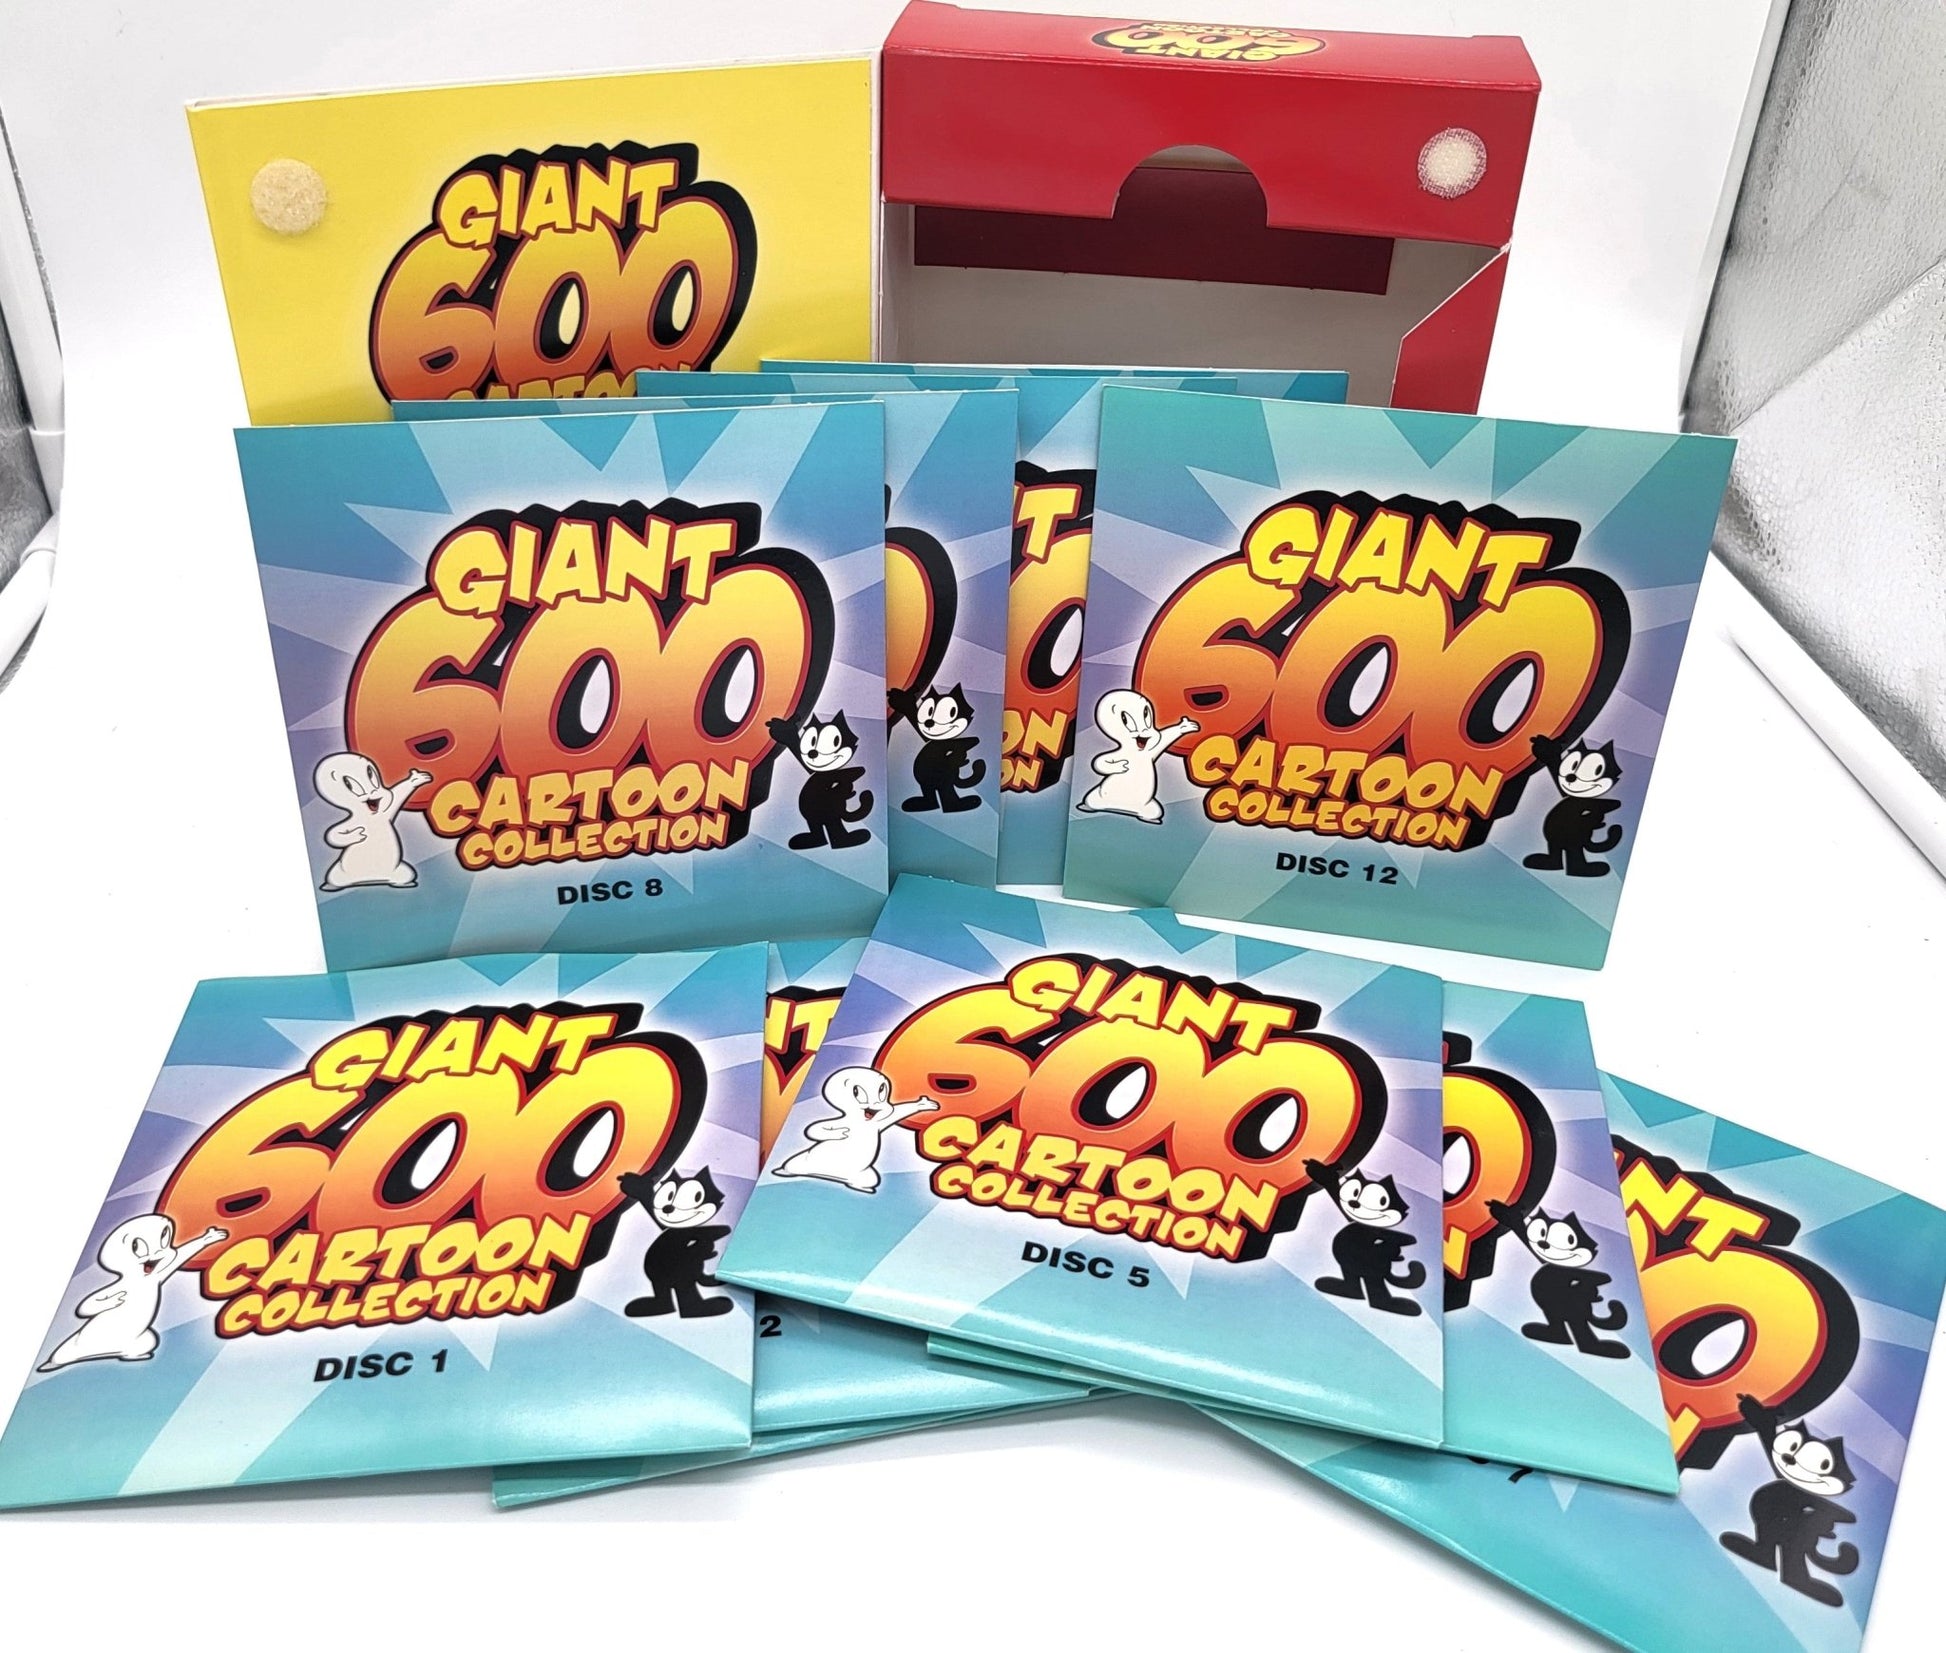 Mill Creek Entertainment - Giant 600 Cartoon Collection | DVD | Over 60 Hours of Entertainment - 12 Disk Set - DVD - Steady Bunny Shop